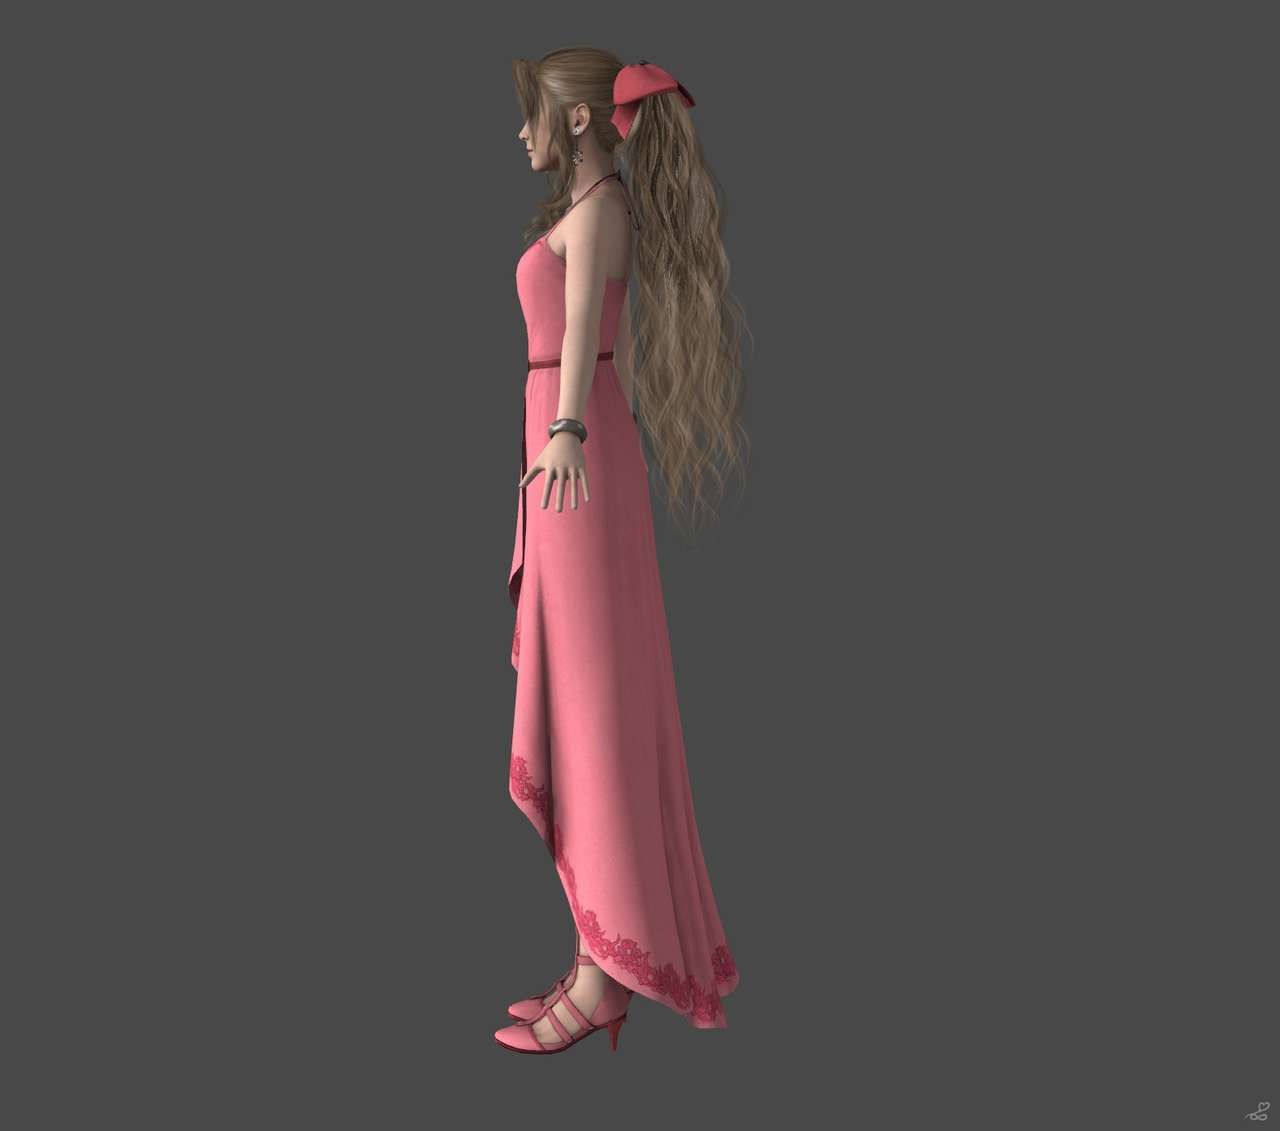 [J.A.] FF7 Remake | Aerith Reference 3